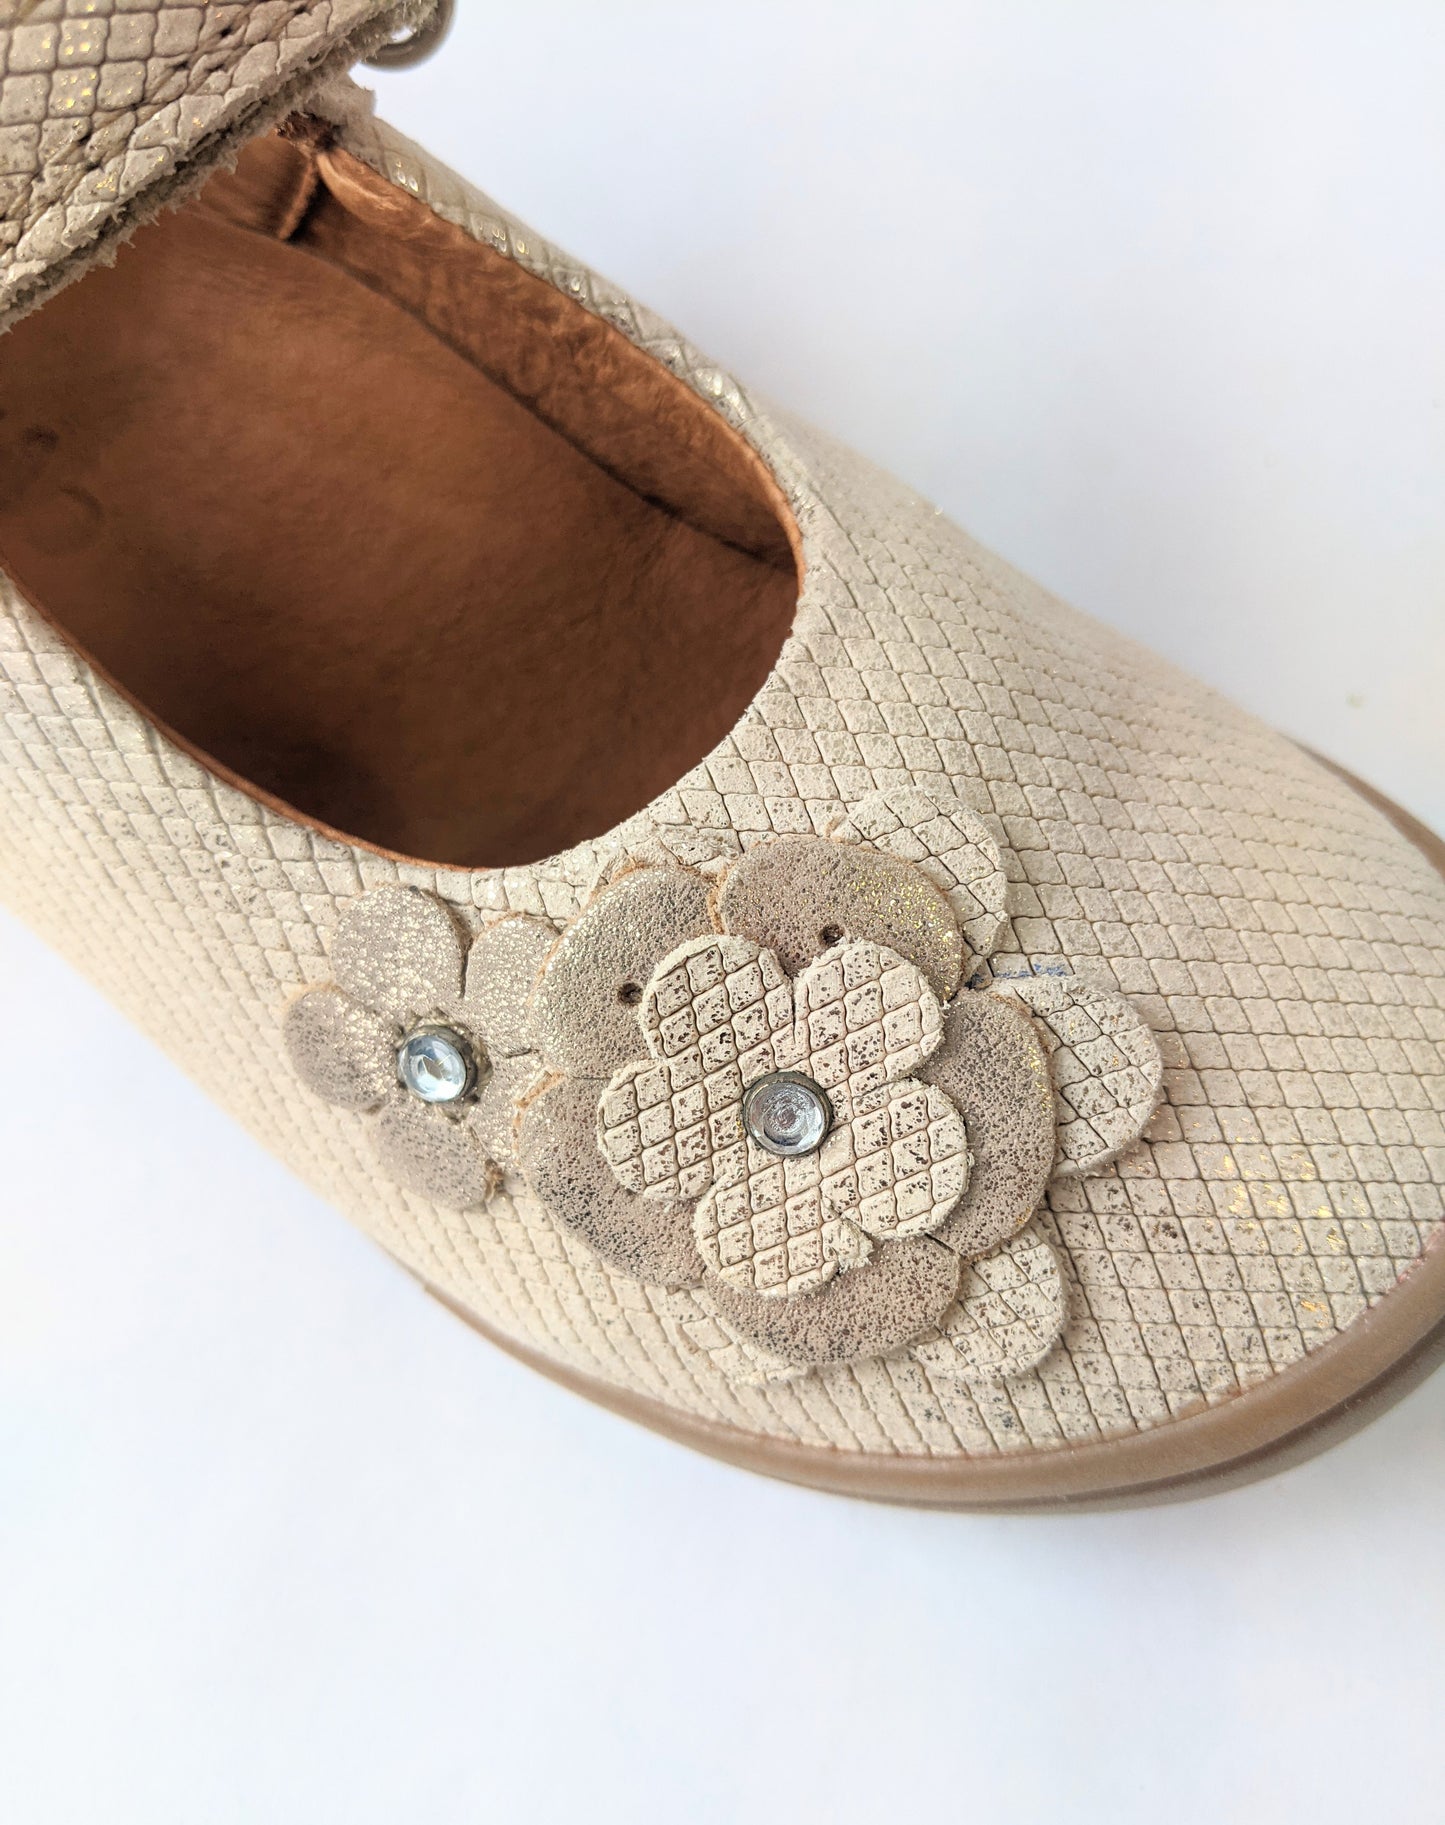 A girls Mary-Jane shoe by Froddo, style G3140089-3A in gold leather with velcro fastening. Close up view of flower embellishment.